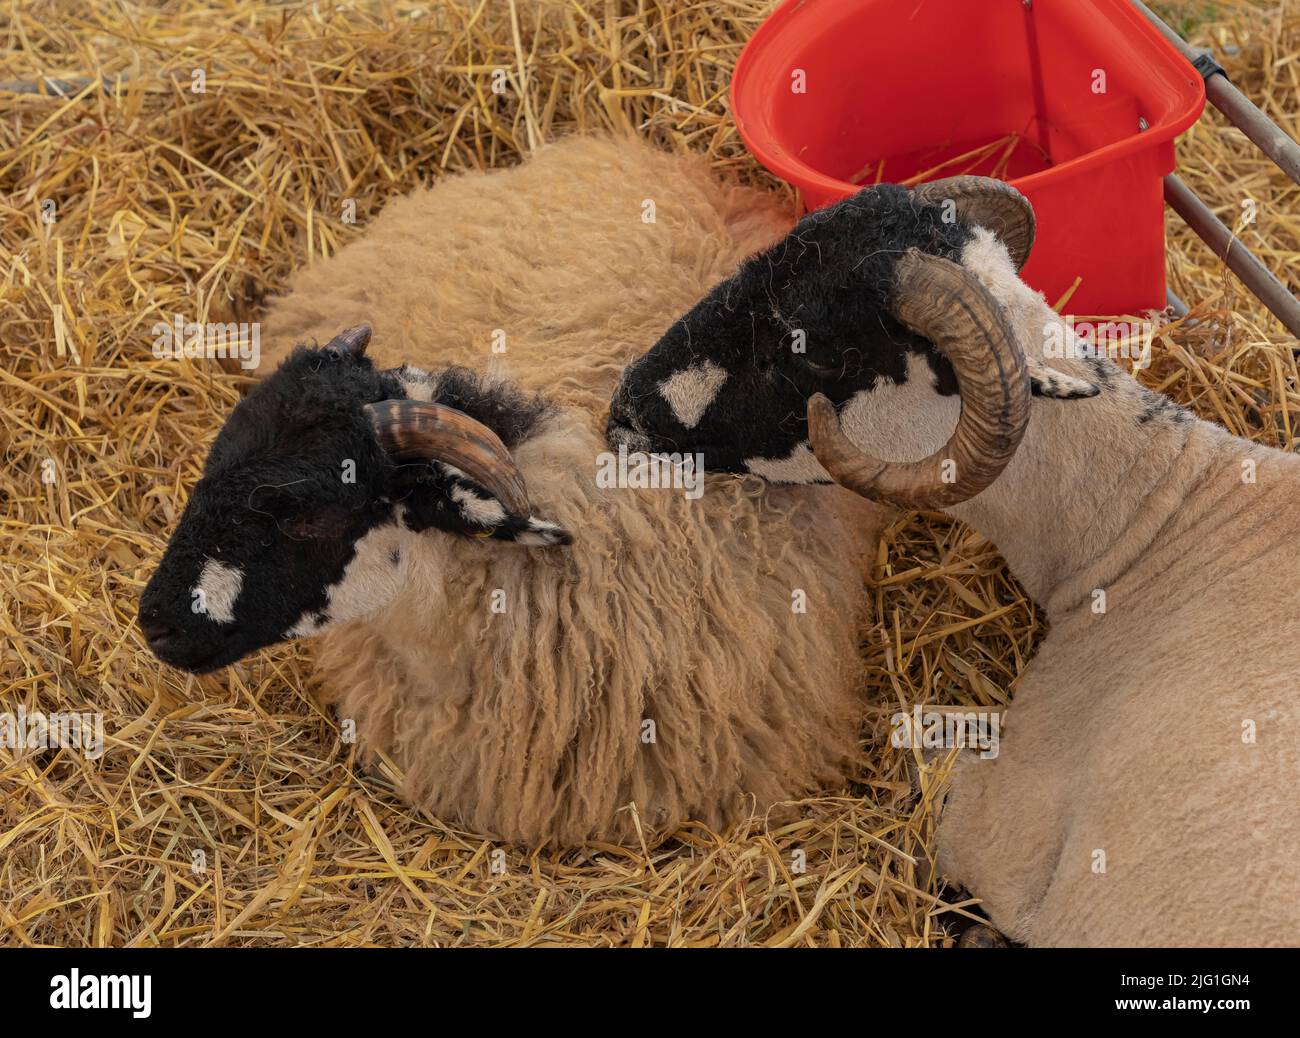 Two sheep with curled horns laying in the straw next to a red feed bucket Stock Photo